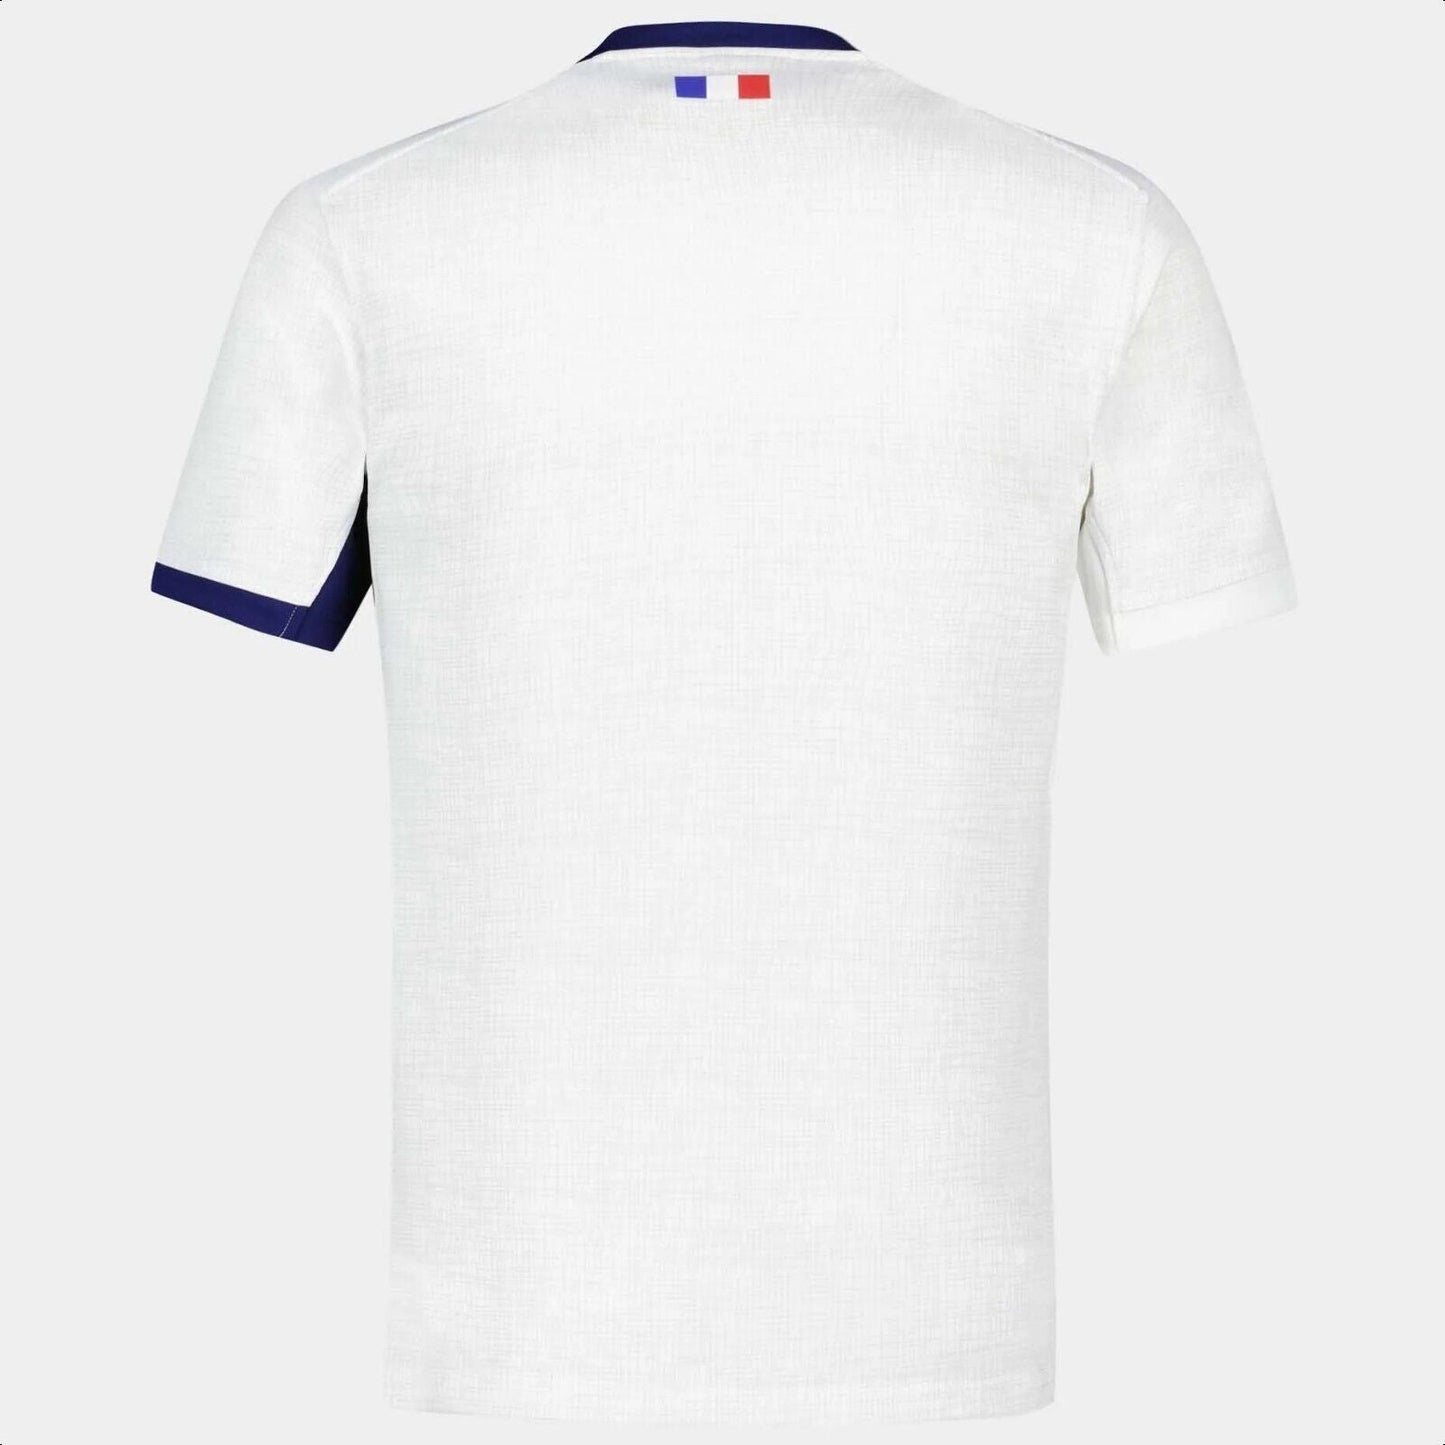 2023 WORLD CUP FRANCE AWAY RUGBY JERSEY